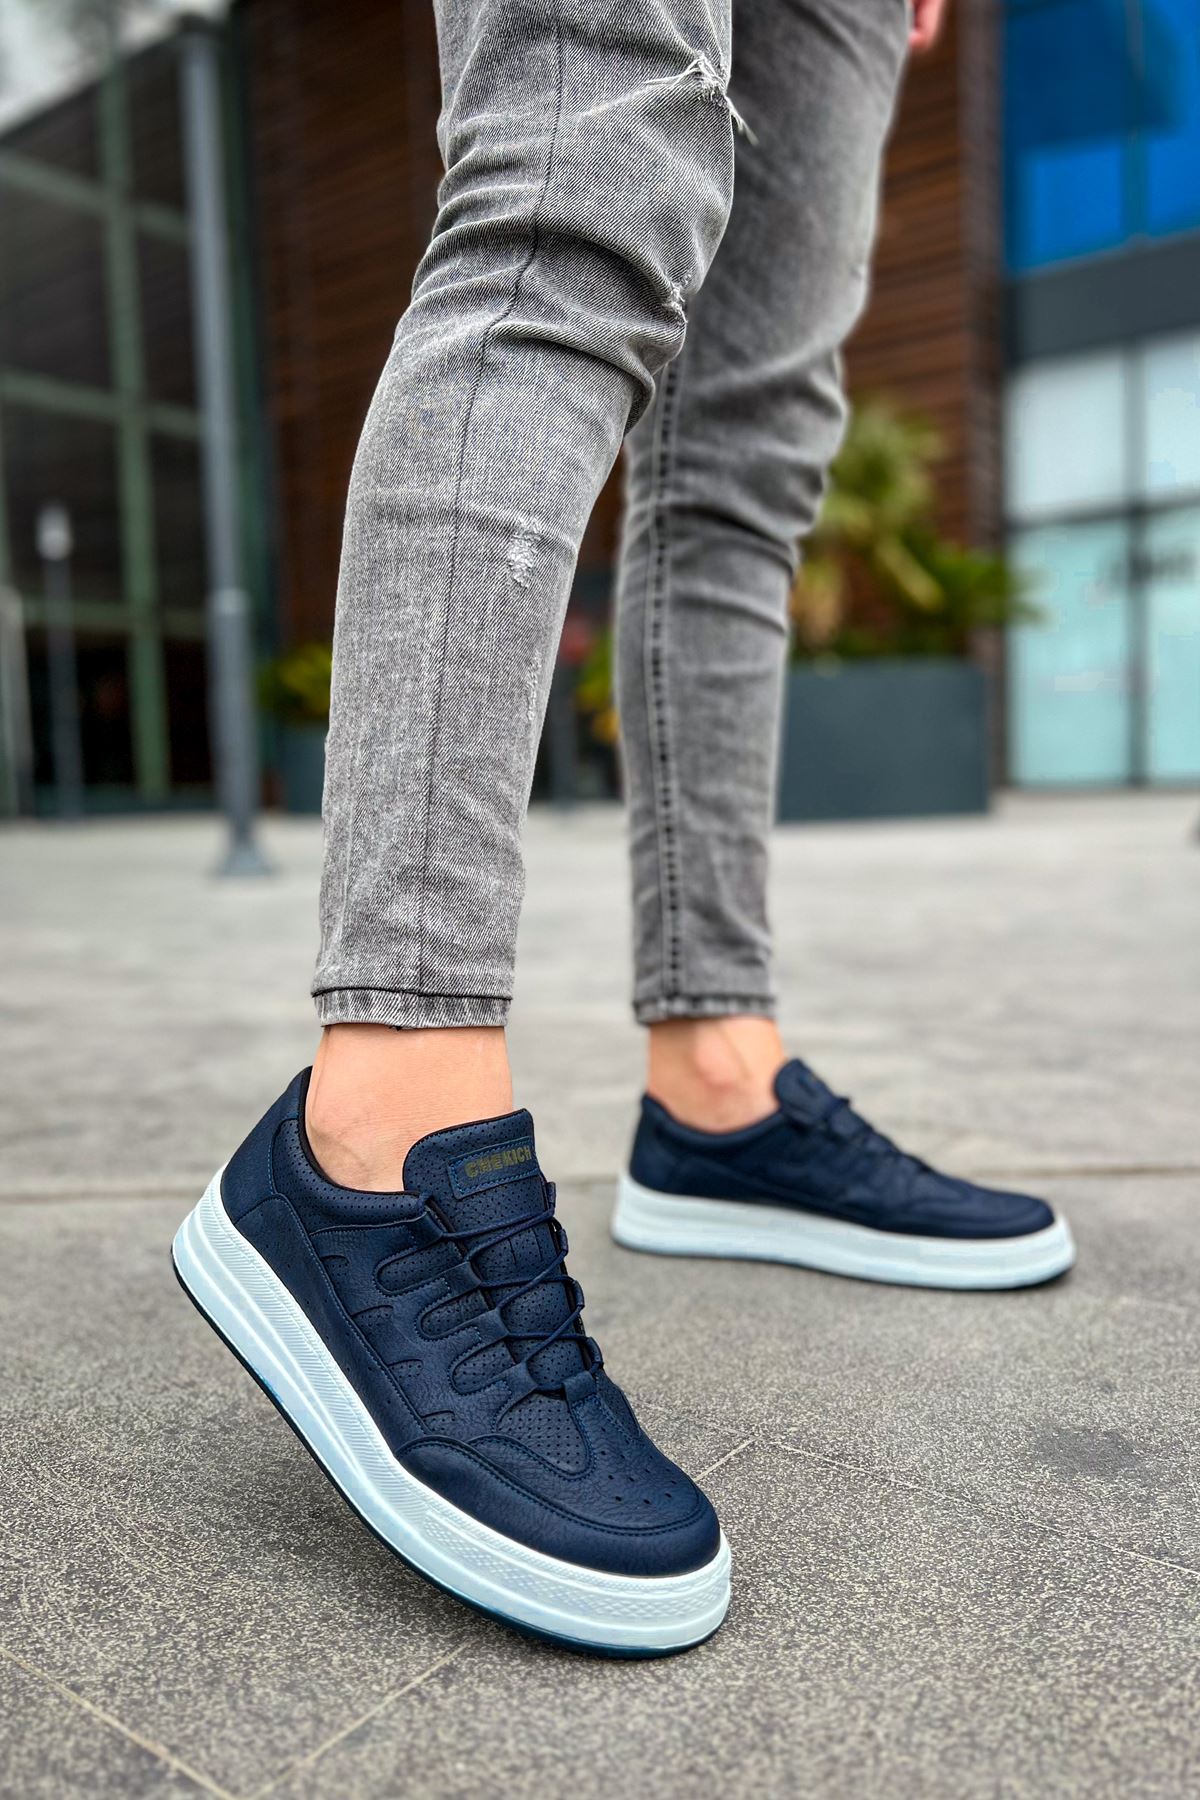 CH040 Men's Unisex Orthopedics Navy Blue-White Sole Casual Sneaker Sports Shoes - STREETMODE™